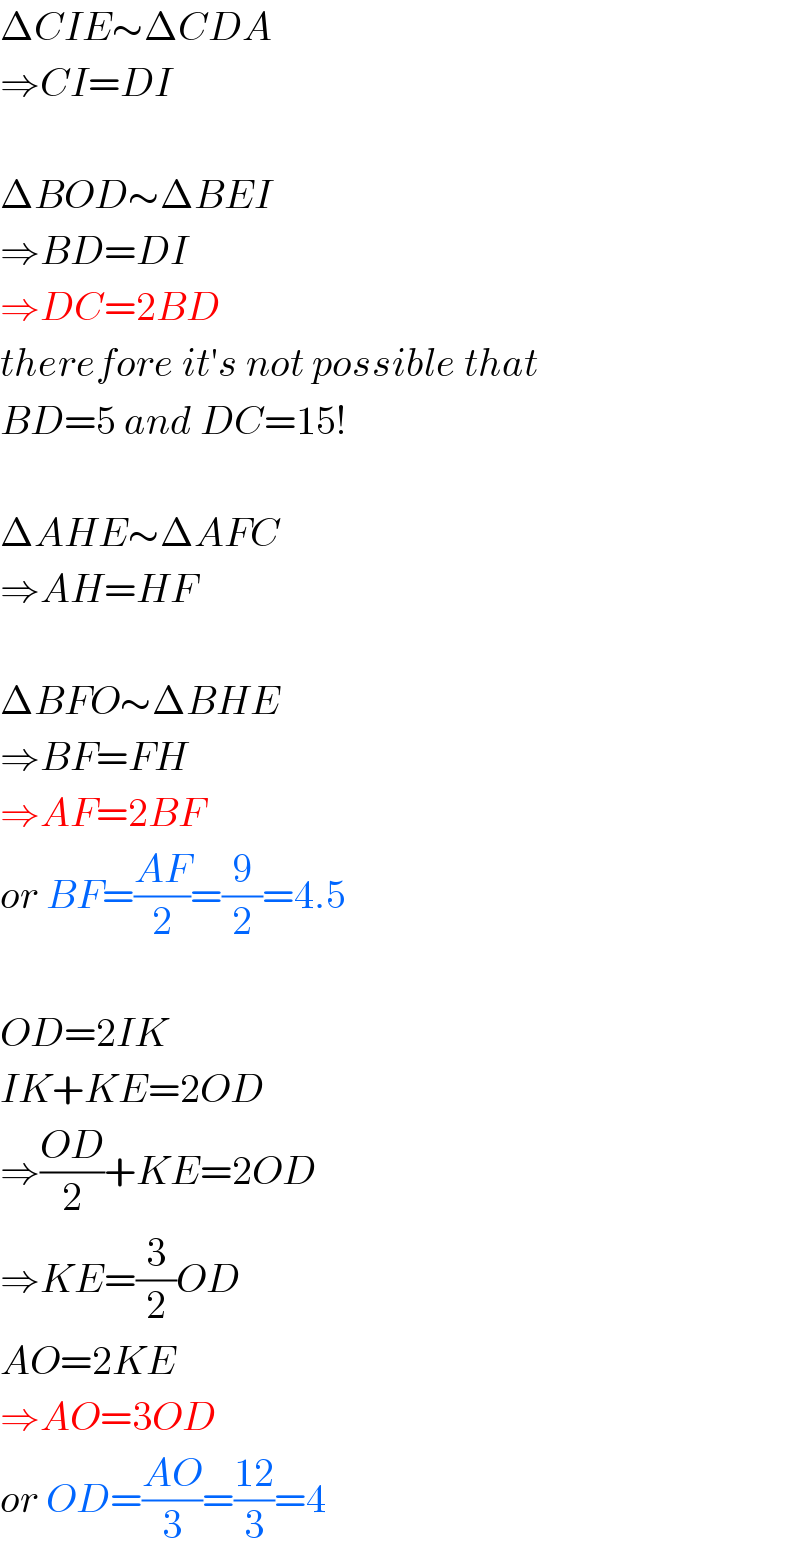 ΔCIE∼ΔCDA  ⇒CI=DI    ΔBOD∼ΔBEI  ⇒BD=DI  ⇒DC=2BD  therefore it′s not possible that  BD=5 and DC=15!    ΔAHE∼ΔAFC  ⇒AH=HF    ΔBFO∼ΔBHE  ⇒BF=FH  ⇒AF=2BF  or BF=((AF)/2)=(9/2)=4.5    OD=2IK  IK+KE=2OD  ⇒((OD)/2)+KE=2OD  ⇒KE=(3/2)OD  AO=2KE  ⇒AO=3OD  or OD=((AO)/3)=((12)/3)=4  